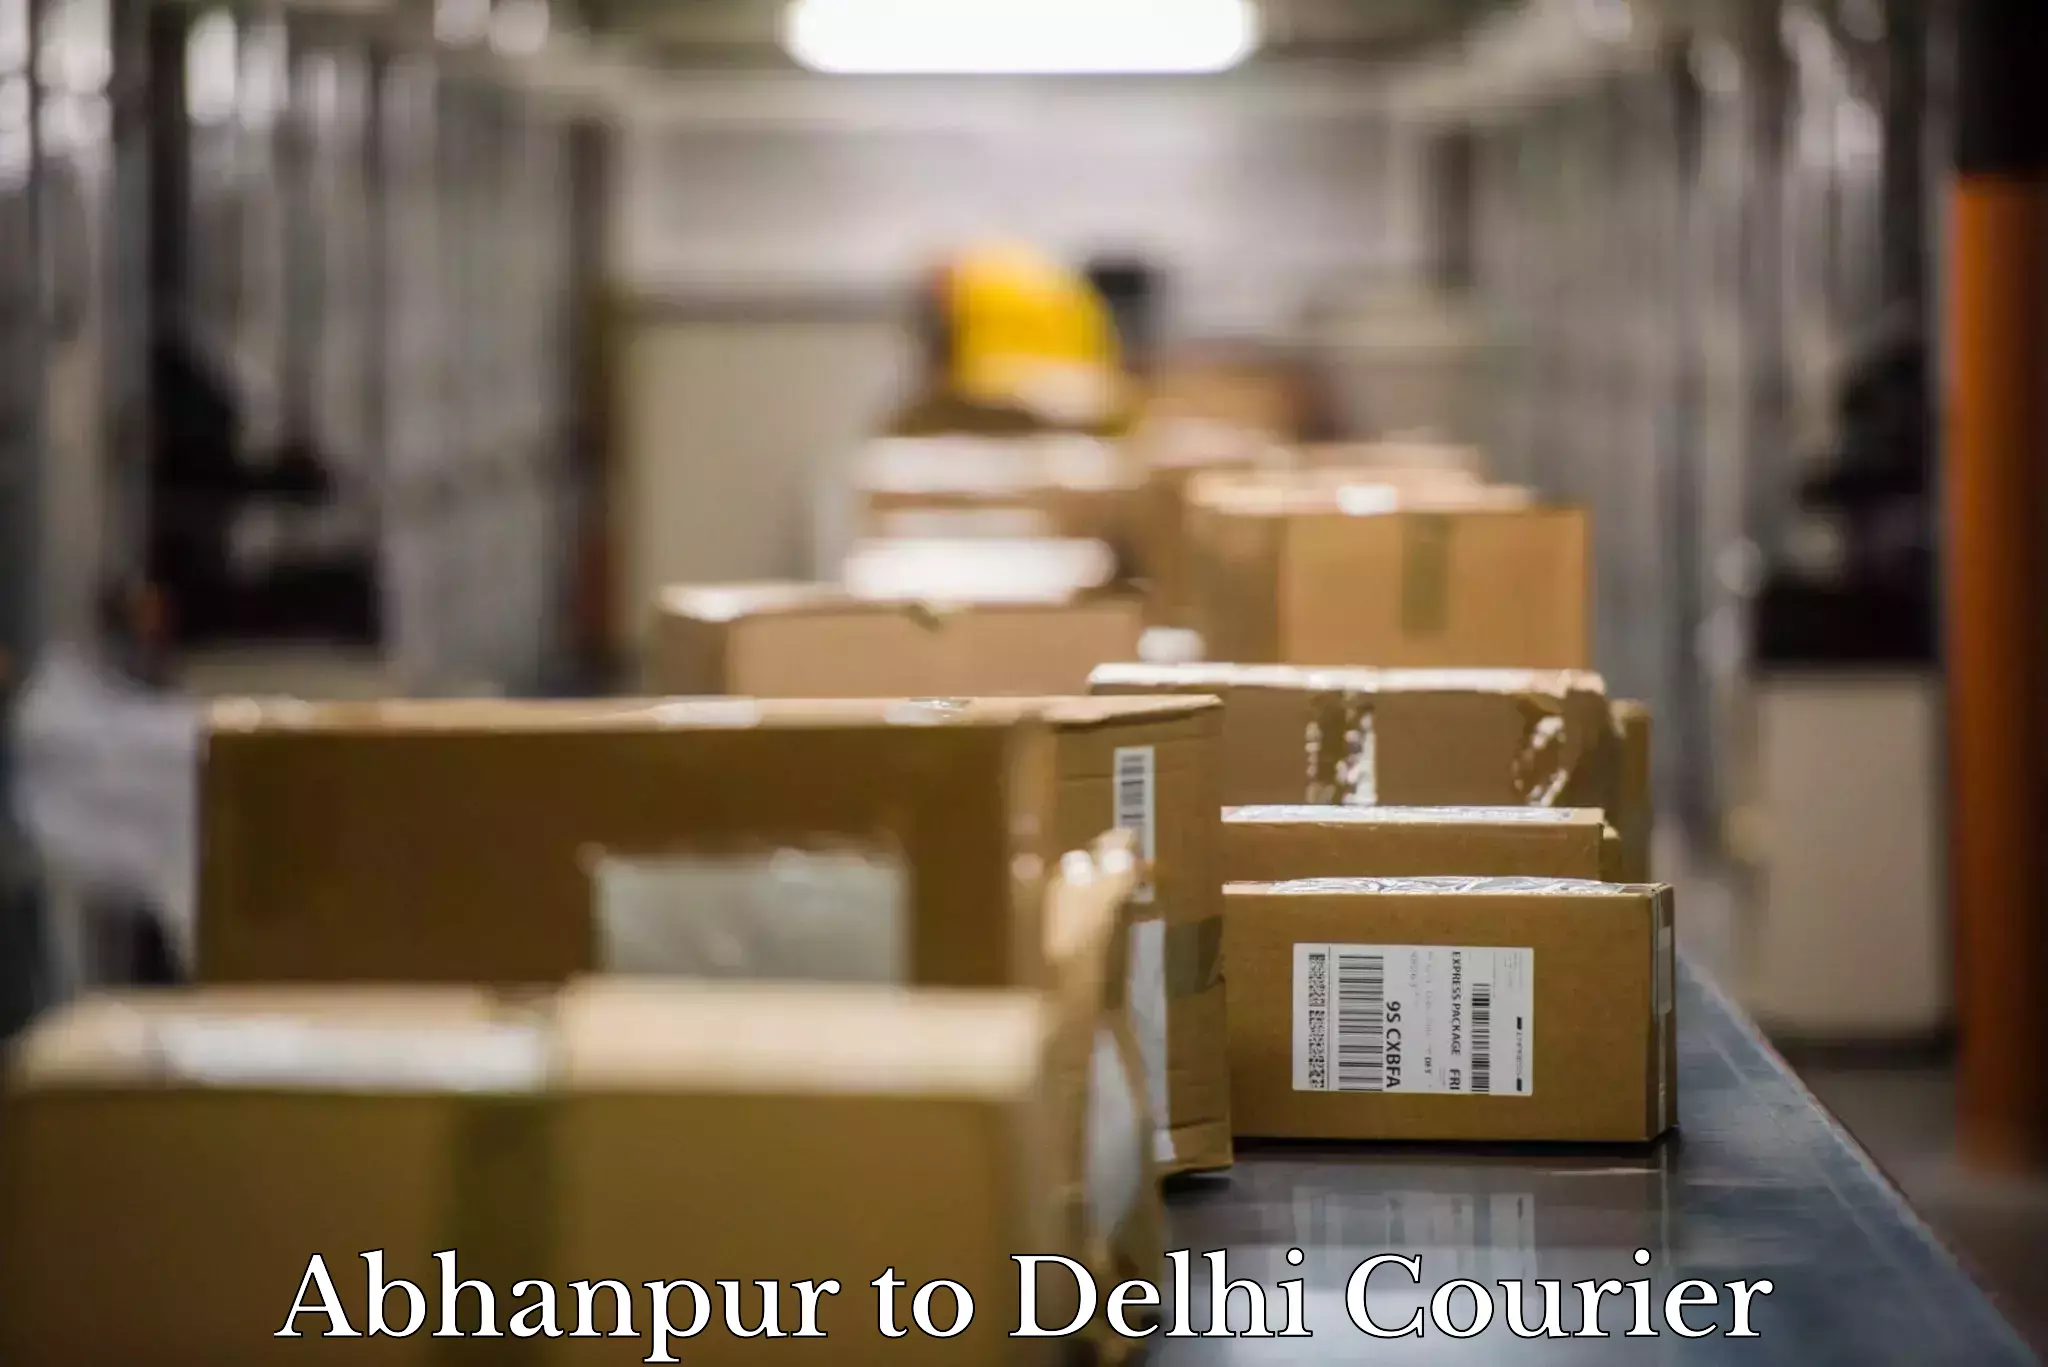 Quality moving and storage Abhanpur to Lodhi Road